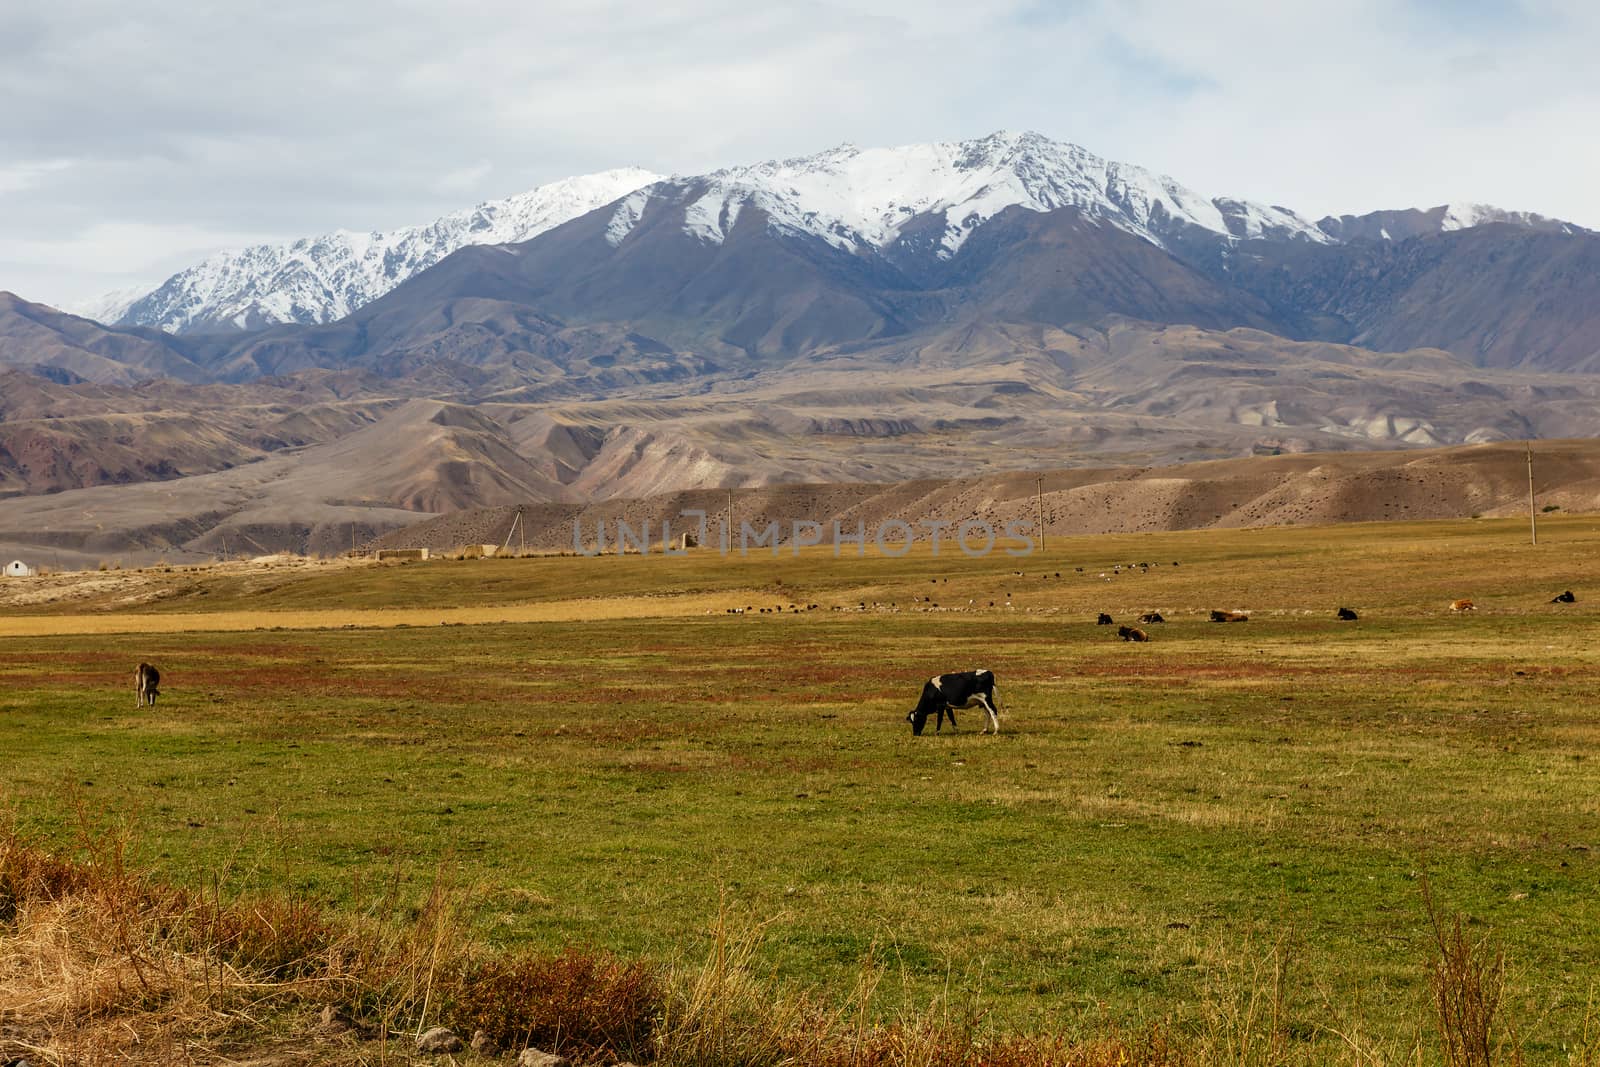 Cows graze in a pasture near the mountains by Mieszko9